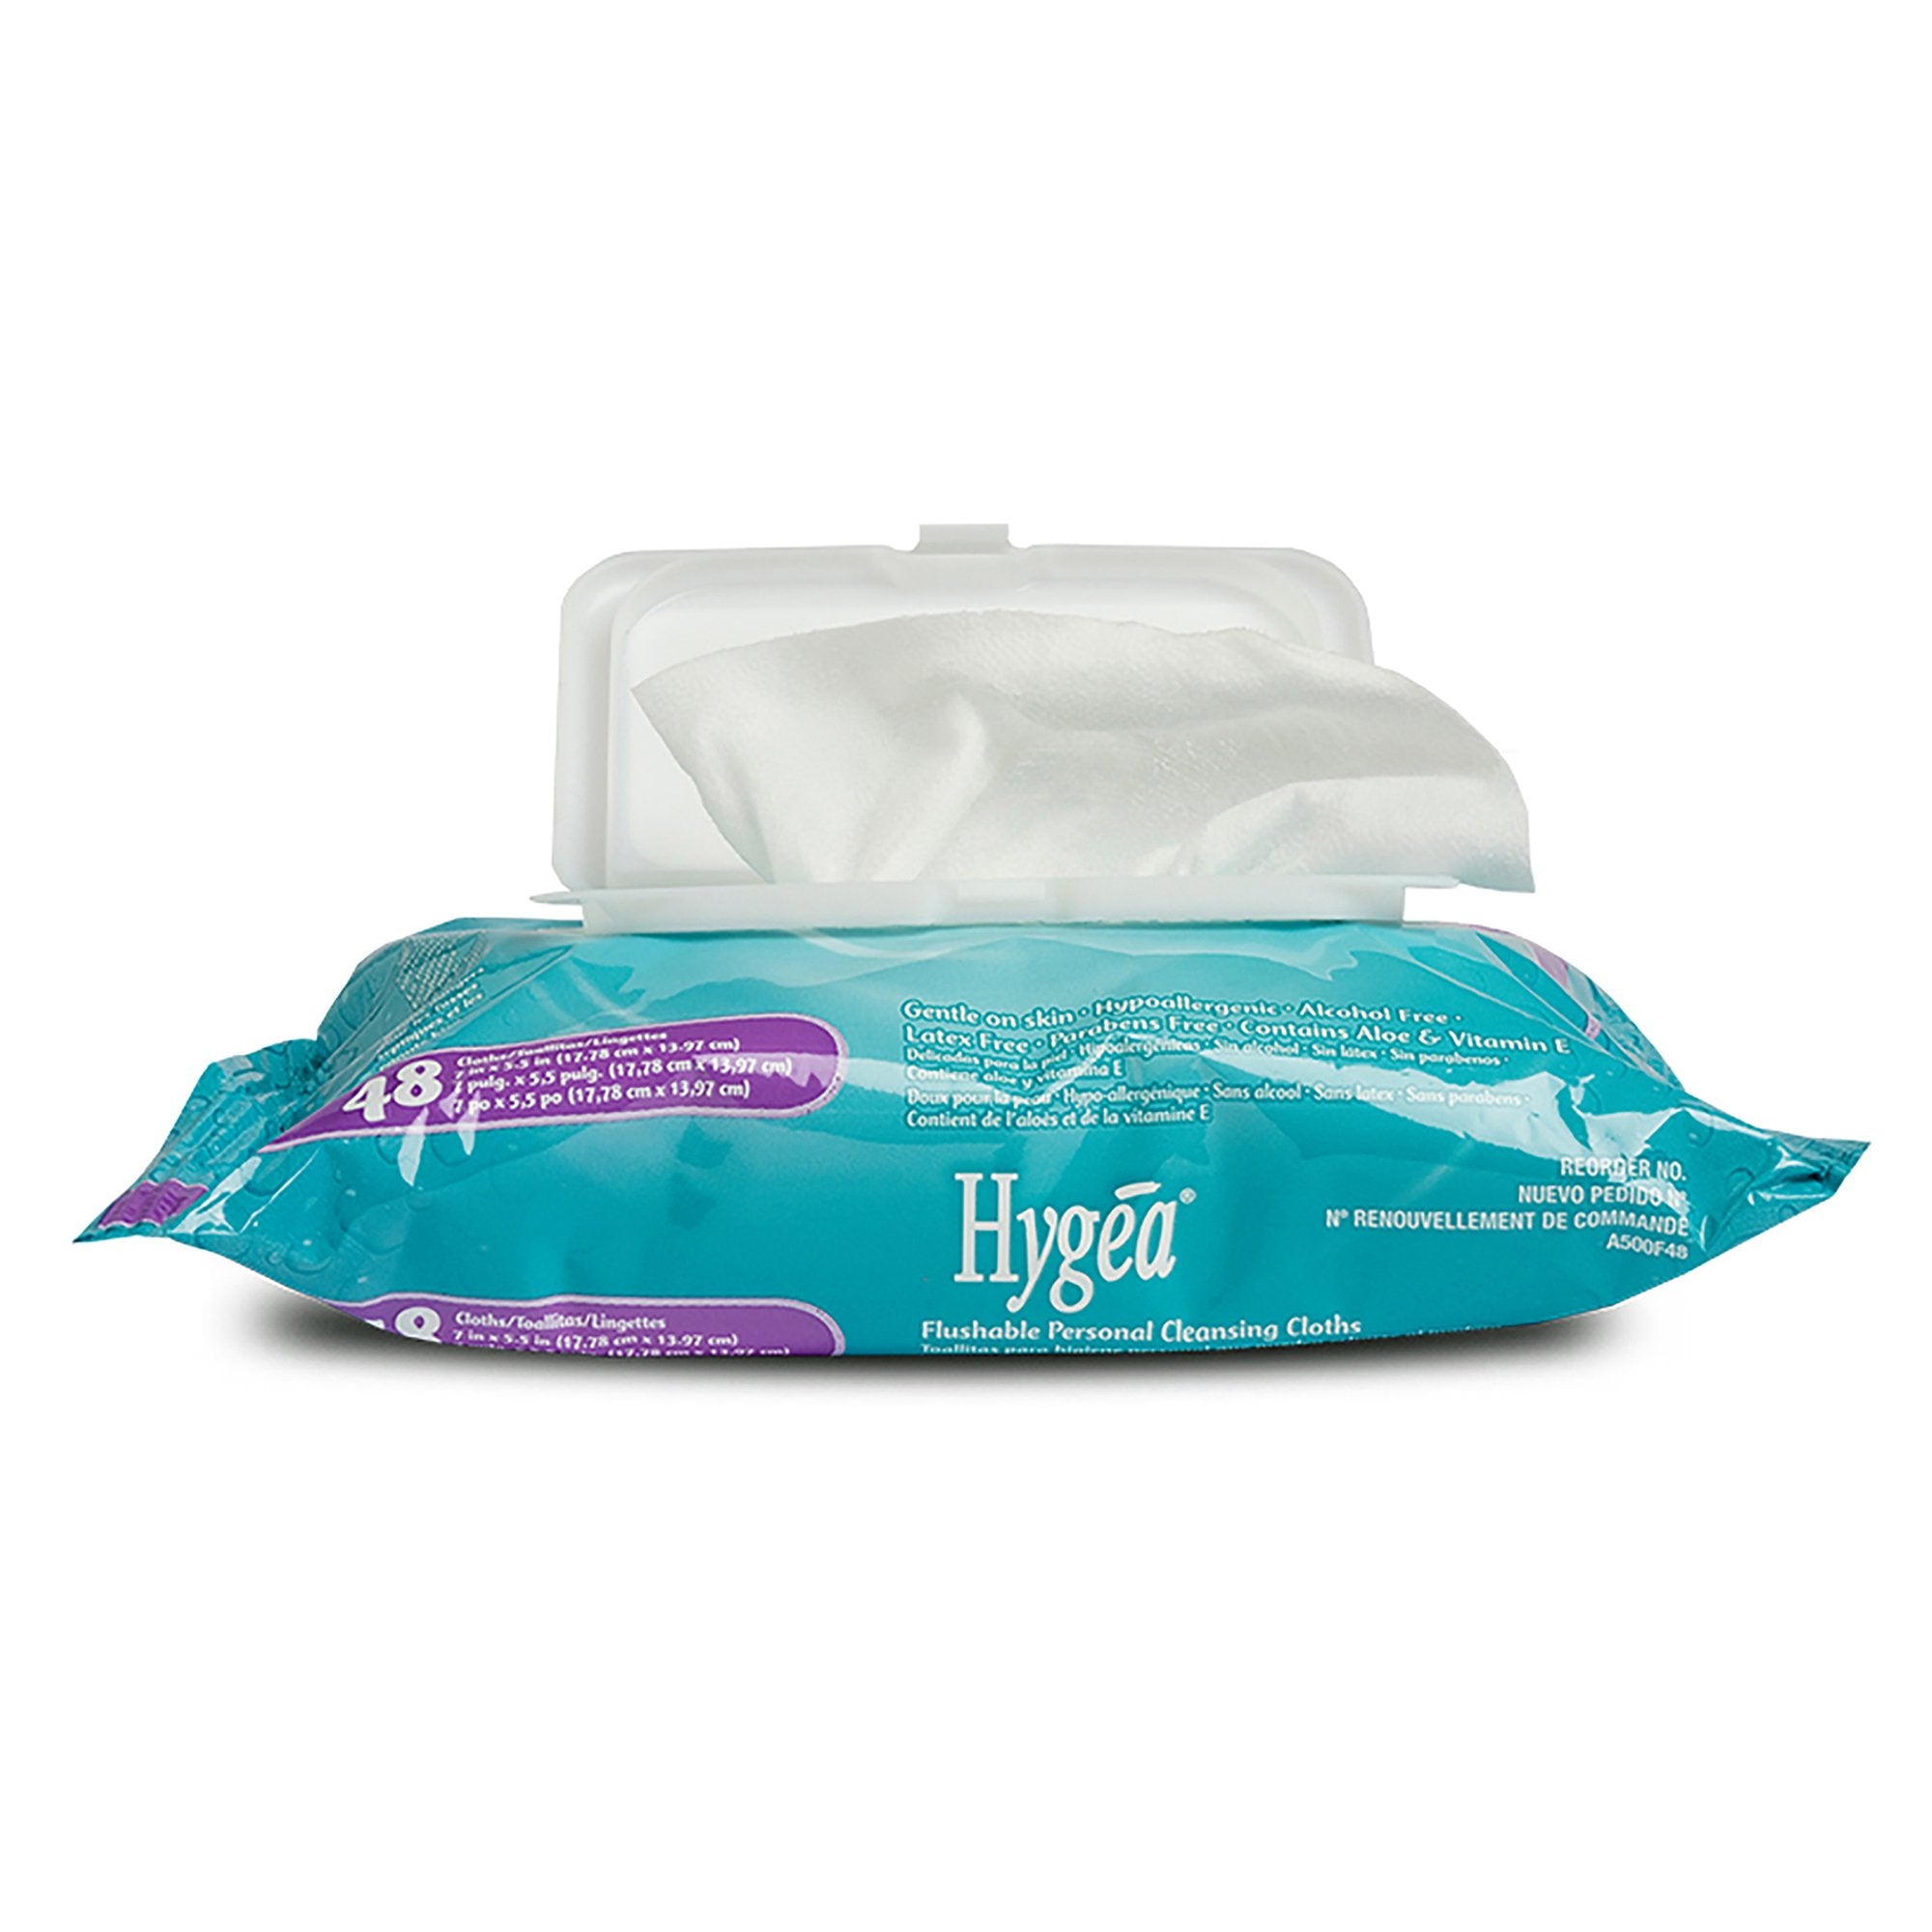 Flushable Personal Wipe Hygea® Soft Pack Scented 48 Count